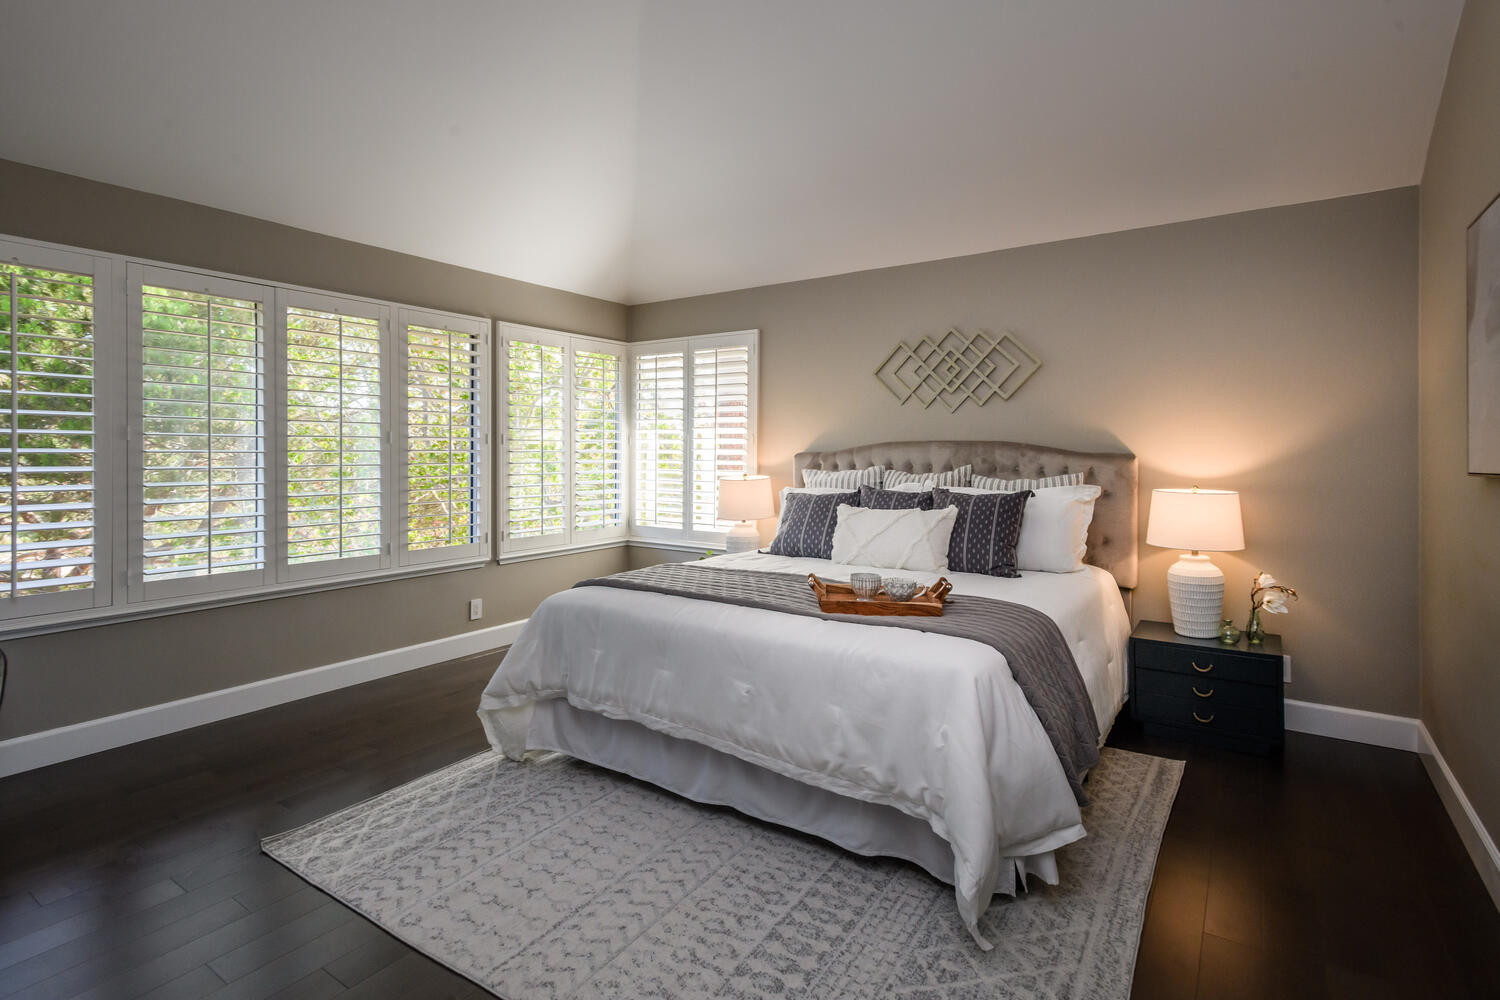 Bedroom in Lighthouse Cove area in Redwood Shores.